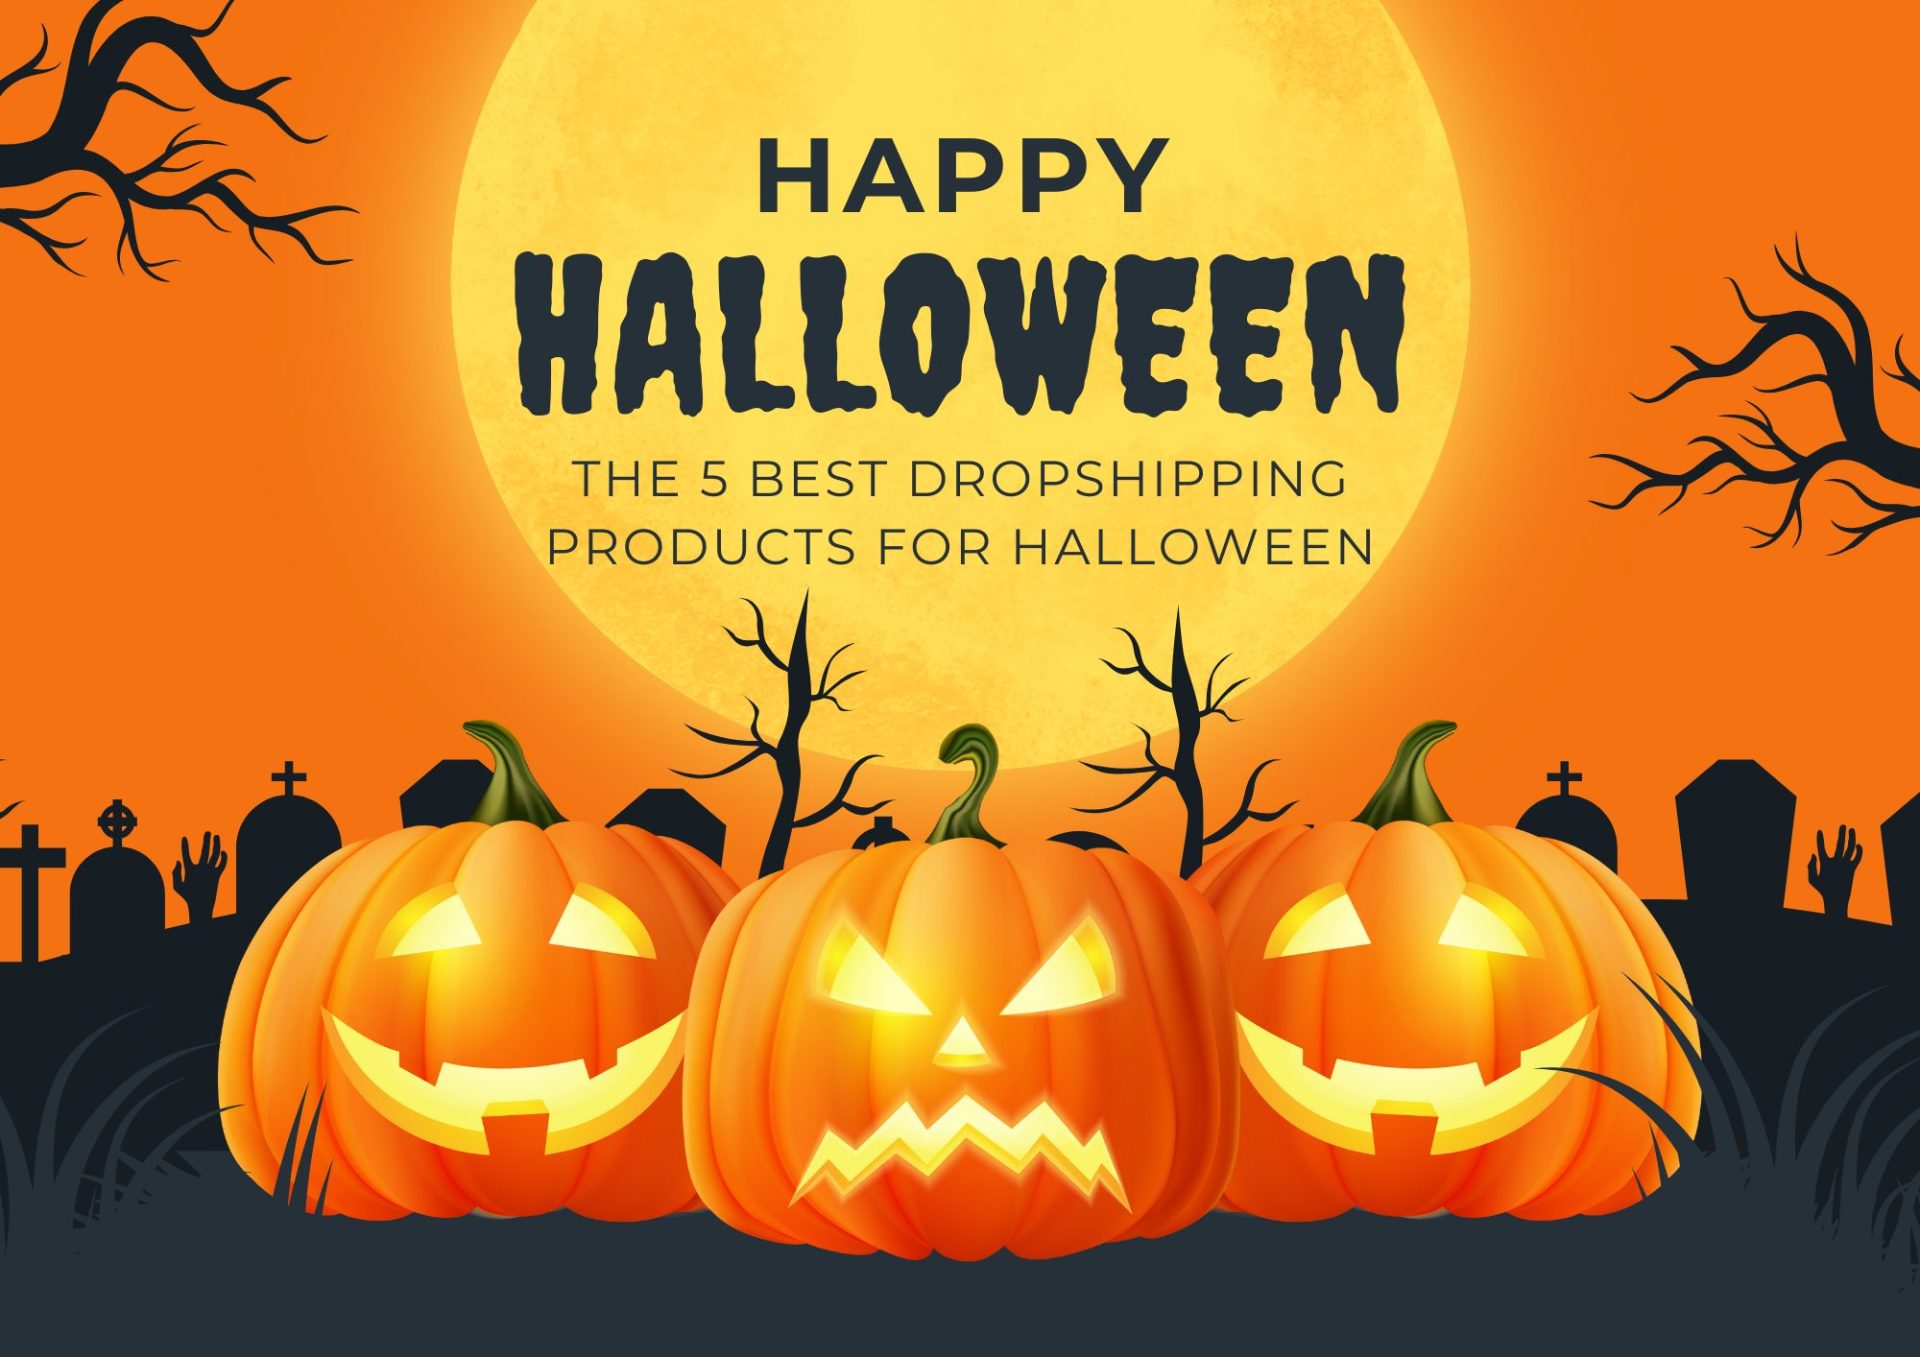 The 5 Best Dropshipping Products for Halloween